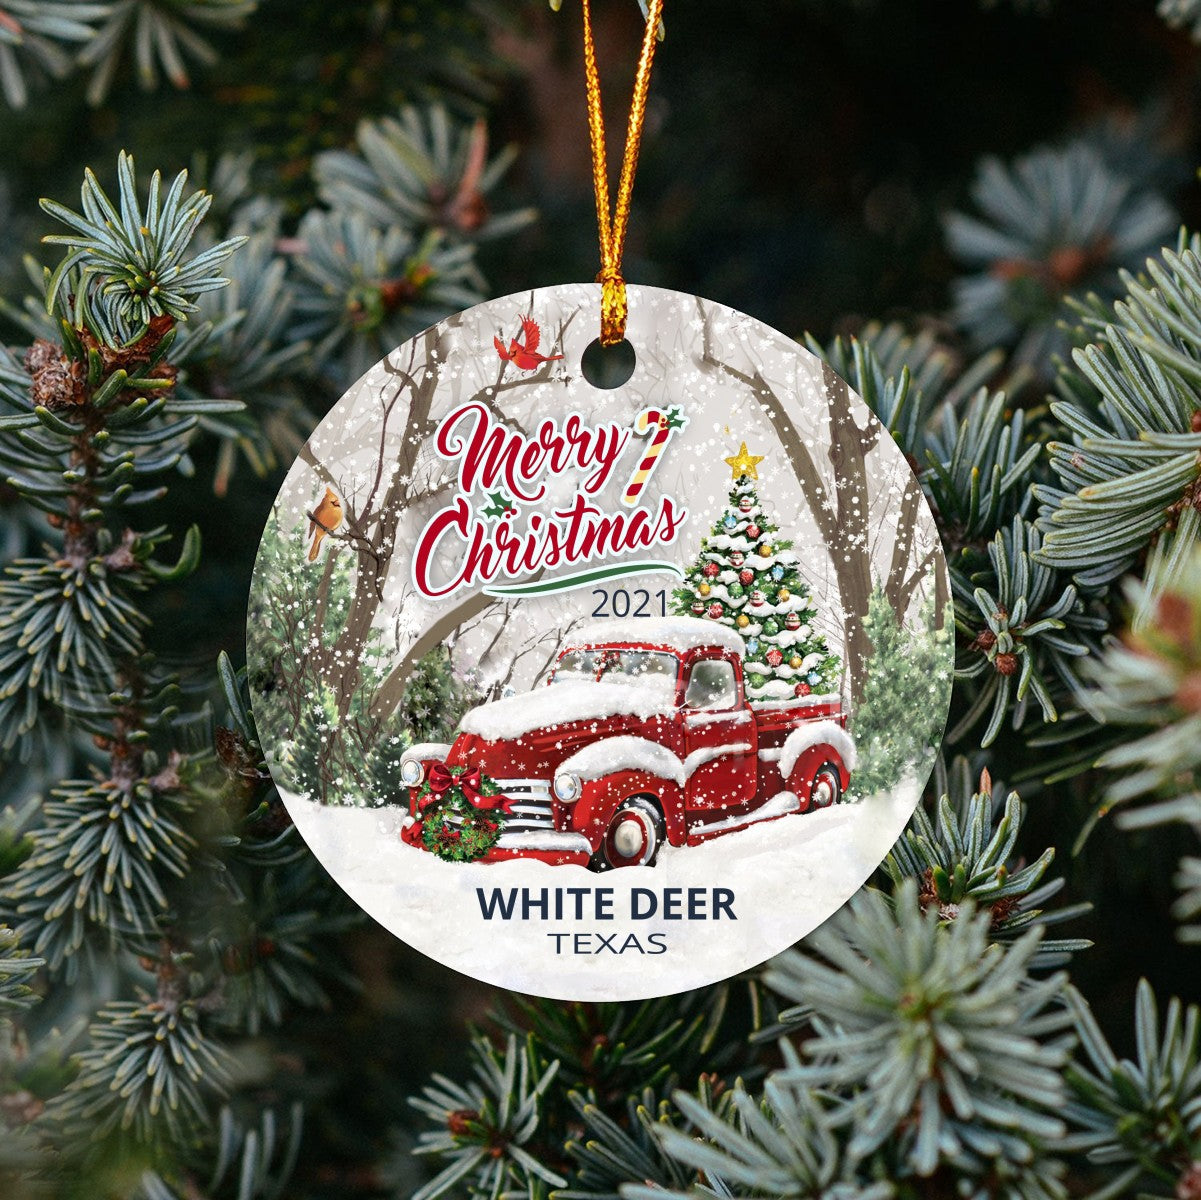 Christmas Tree Ornaments White Deer - Ornament With Name City, State White Deer Texas TX Ornament - Red Truck Xmas Ornaments 3'' Plastic Gift For Family, Friend And Housewarming